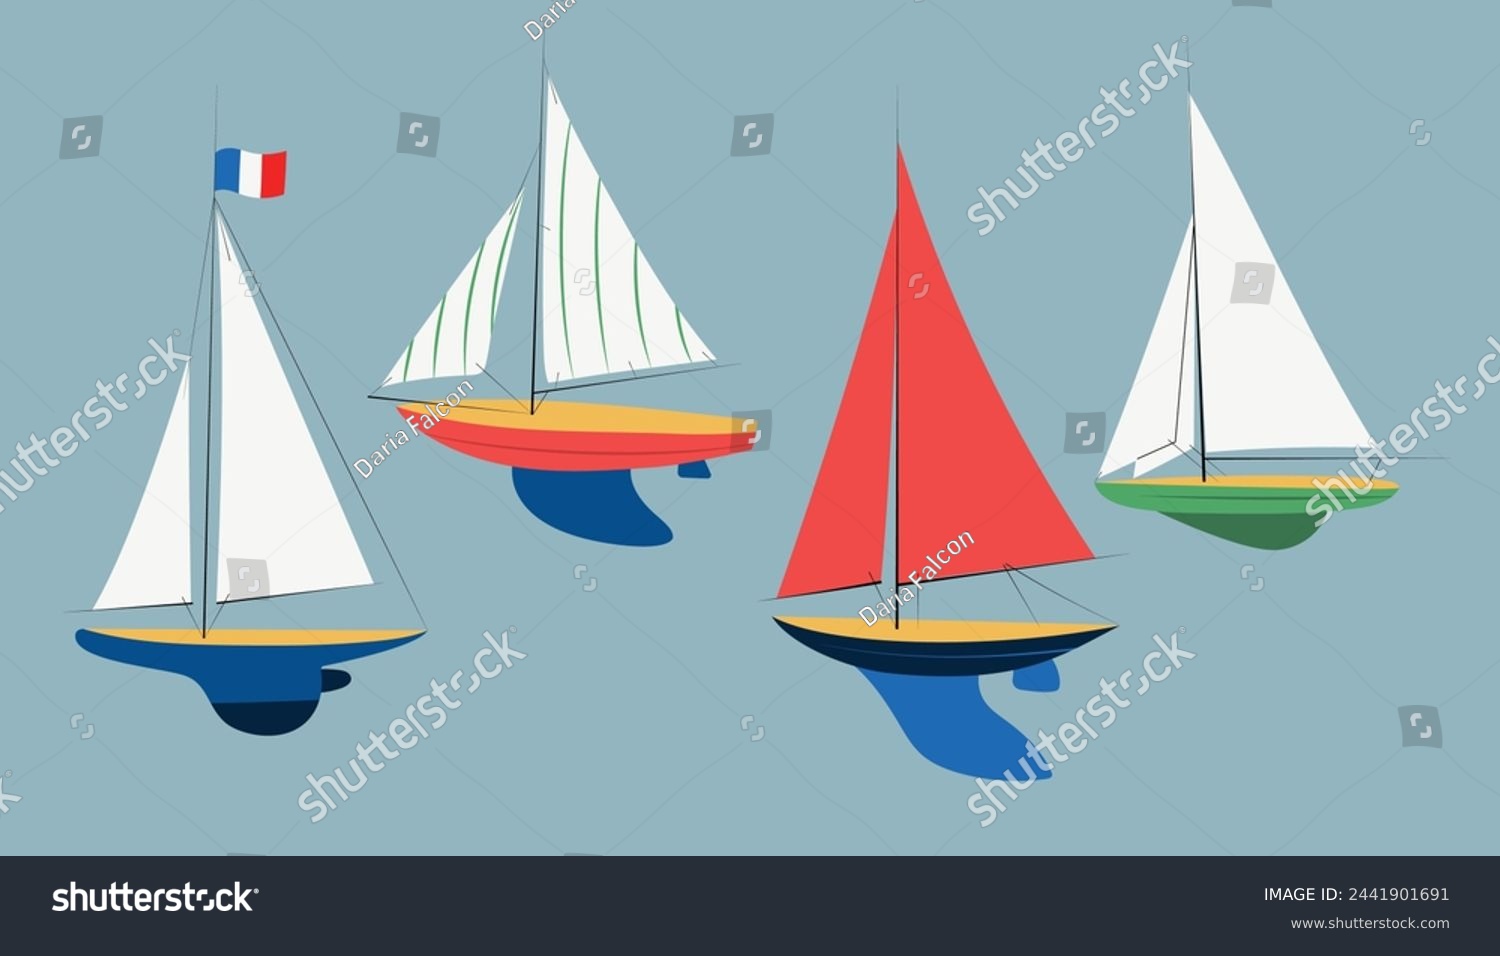 SVG of Set with four different sailing boats,  vintage style yacht models. Hand drawn vector illustrations, isolated on water blue background svg